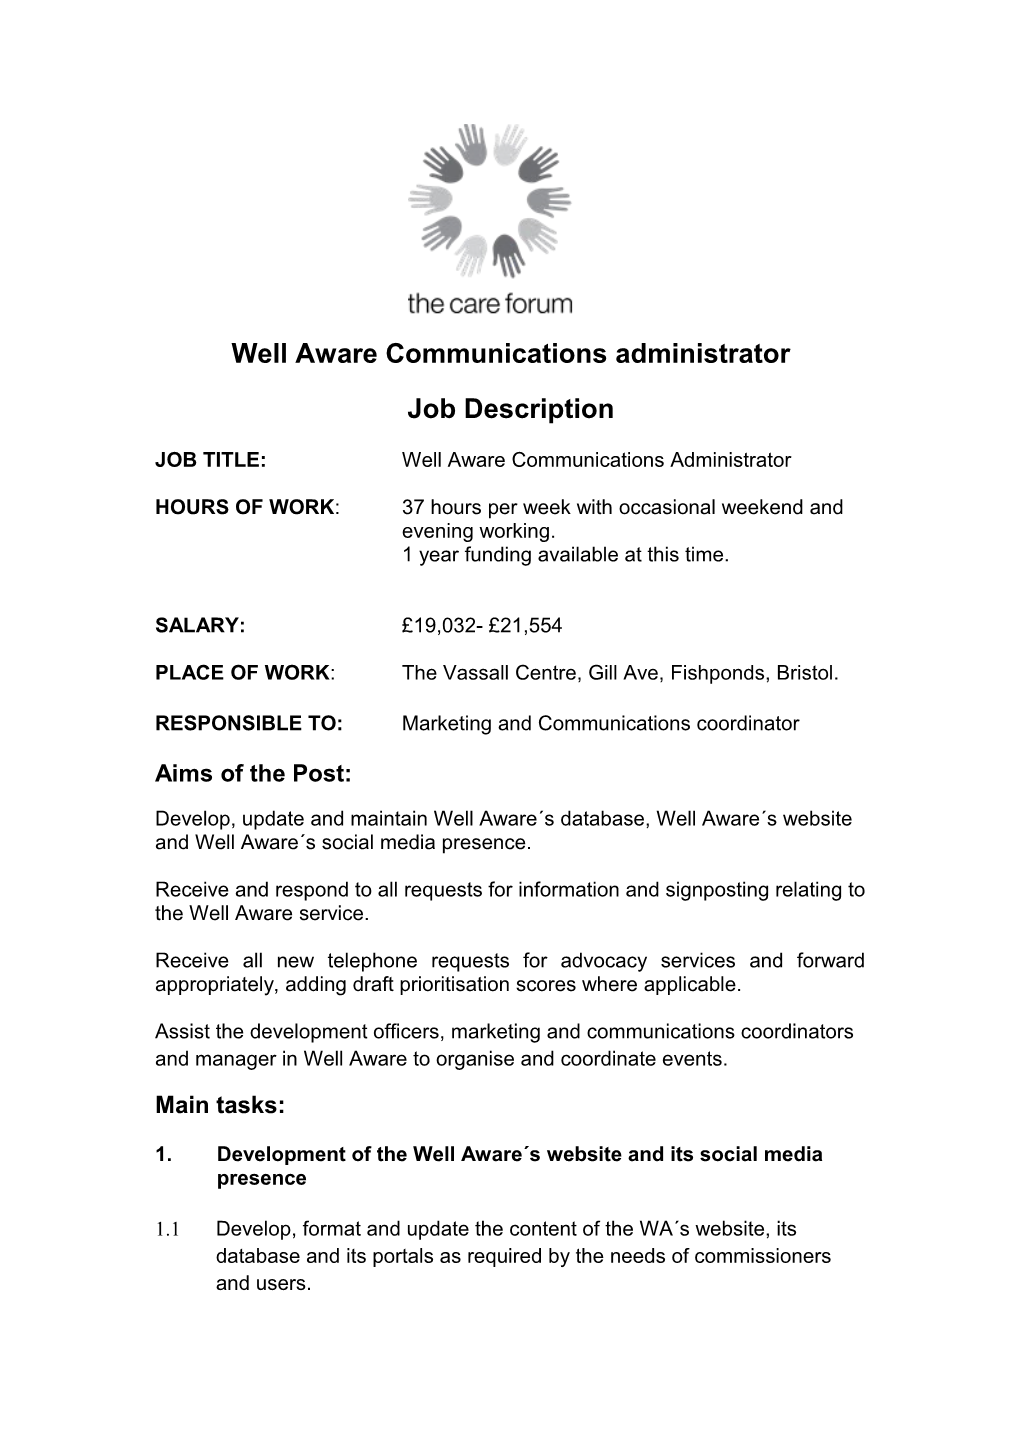 Well Aware Communications Administrator